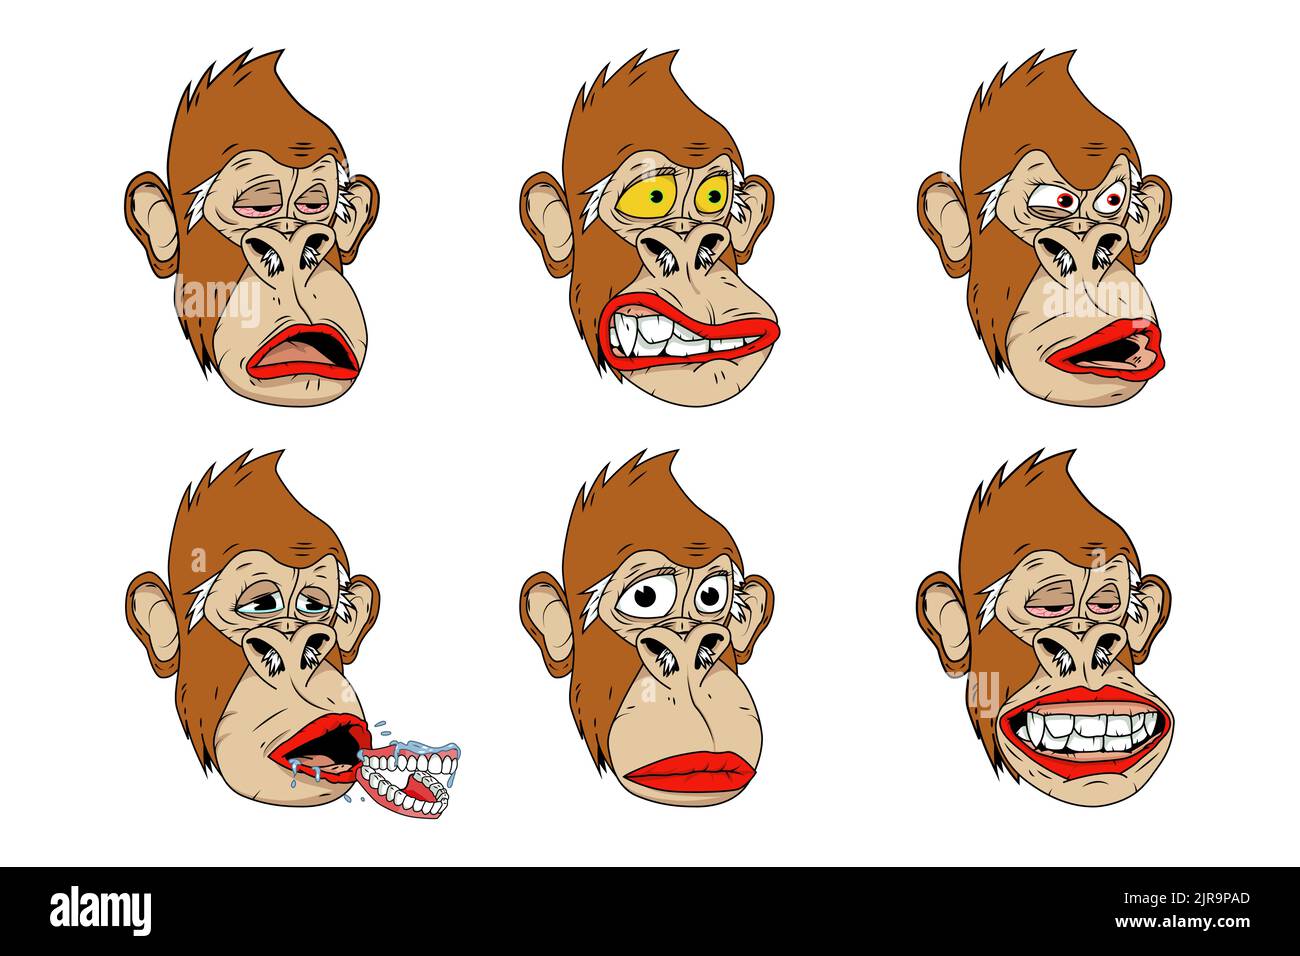 Woman apes expression set. PFP NFT eyes and mouth traits. Grandma monkey head illustration isolated on white background. Stock Vector